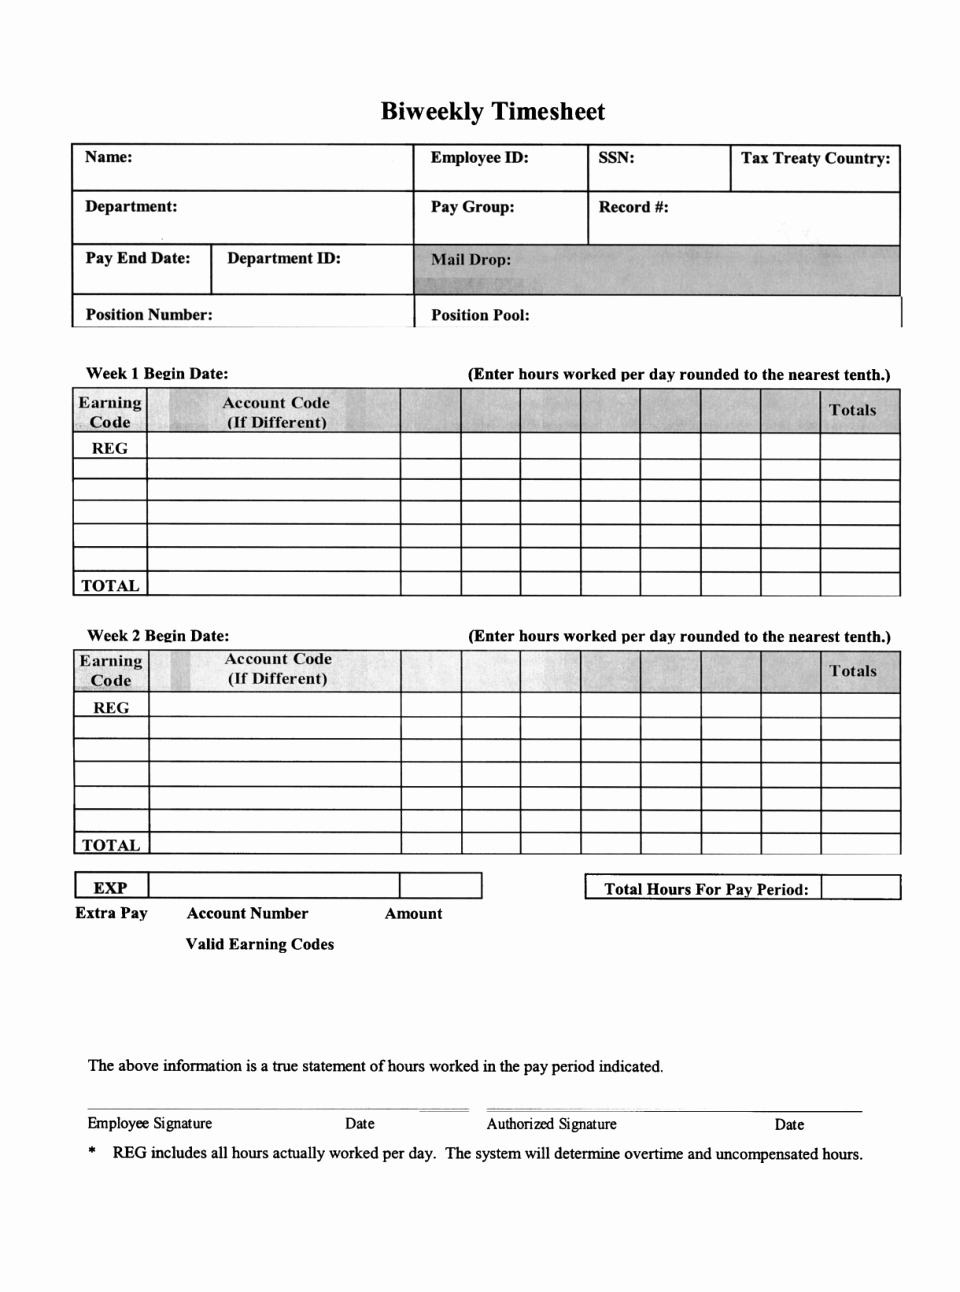 Daily Timesheet Template Free Printable New Weekly Timesheet Spreadsheet Sheet Template Worksheet and